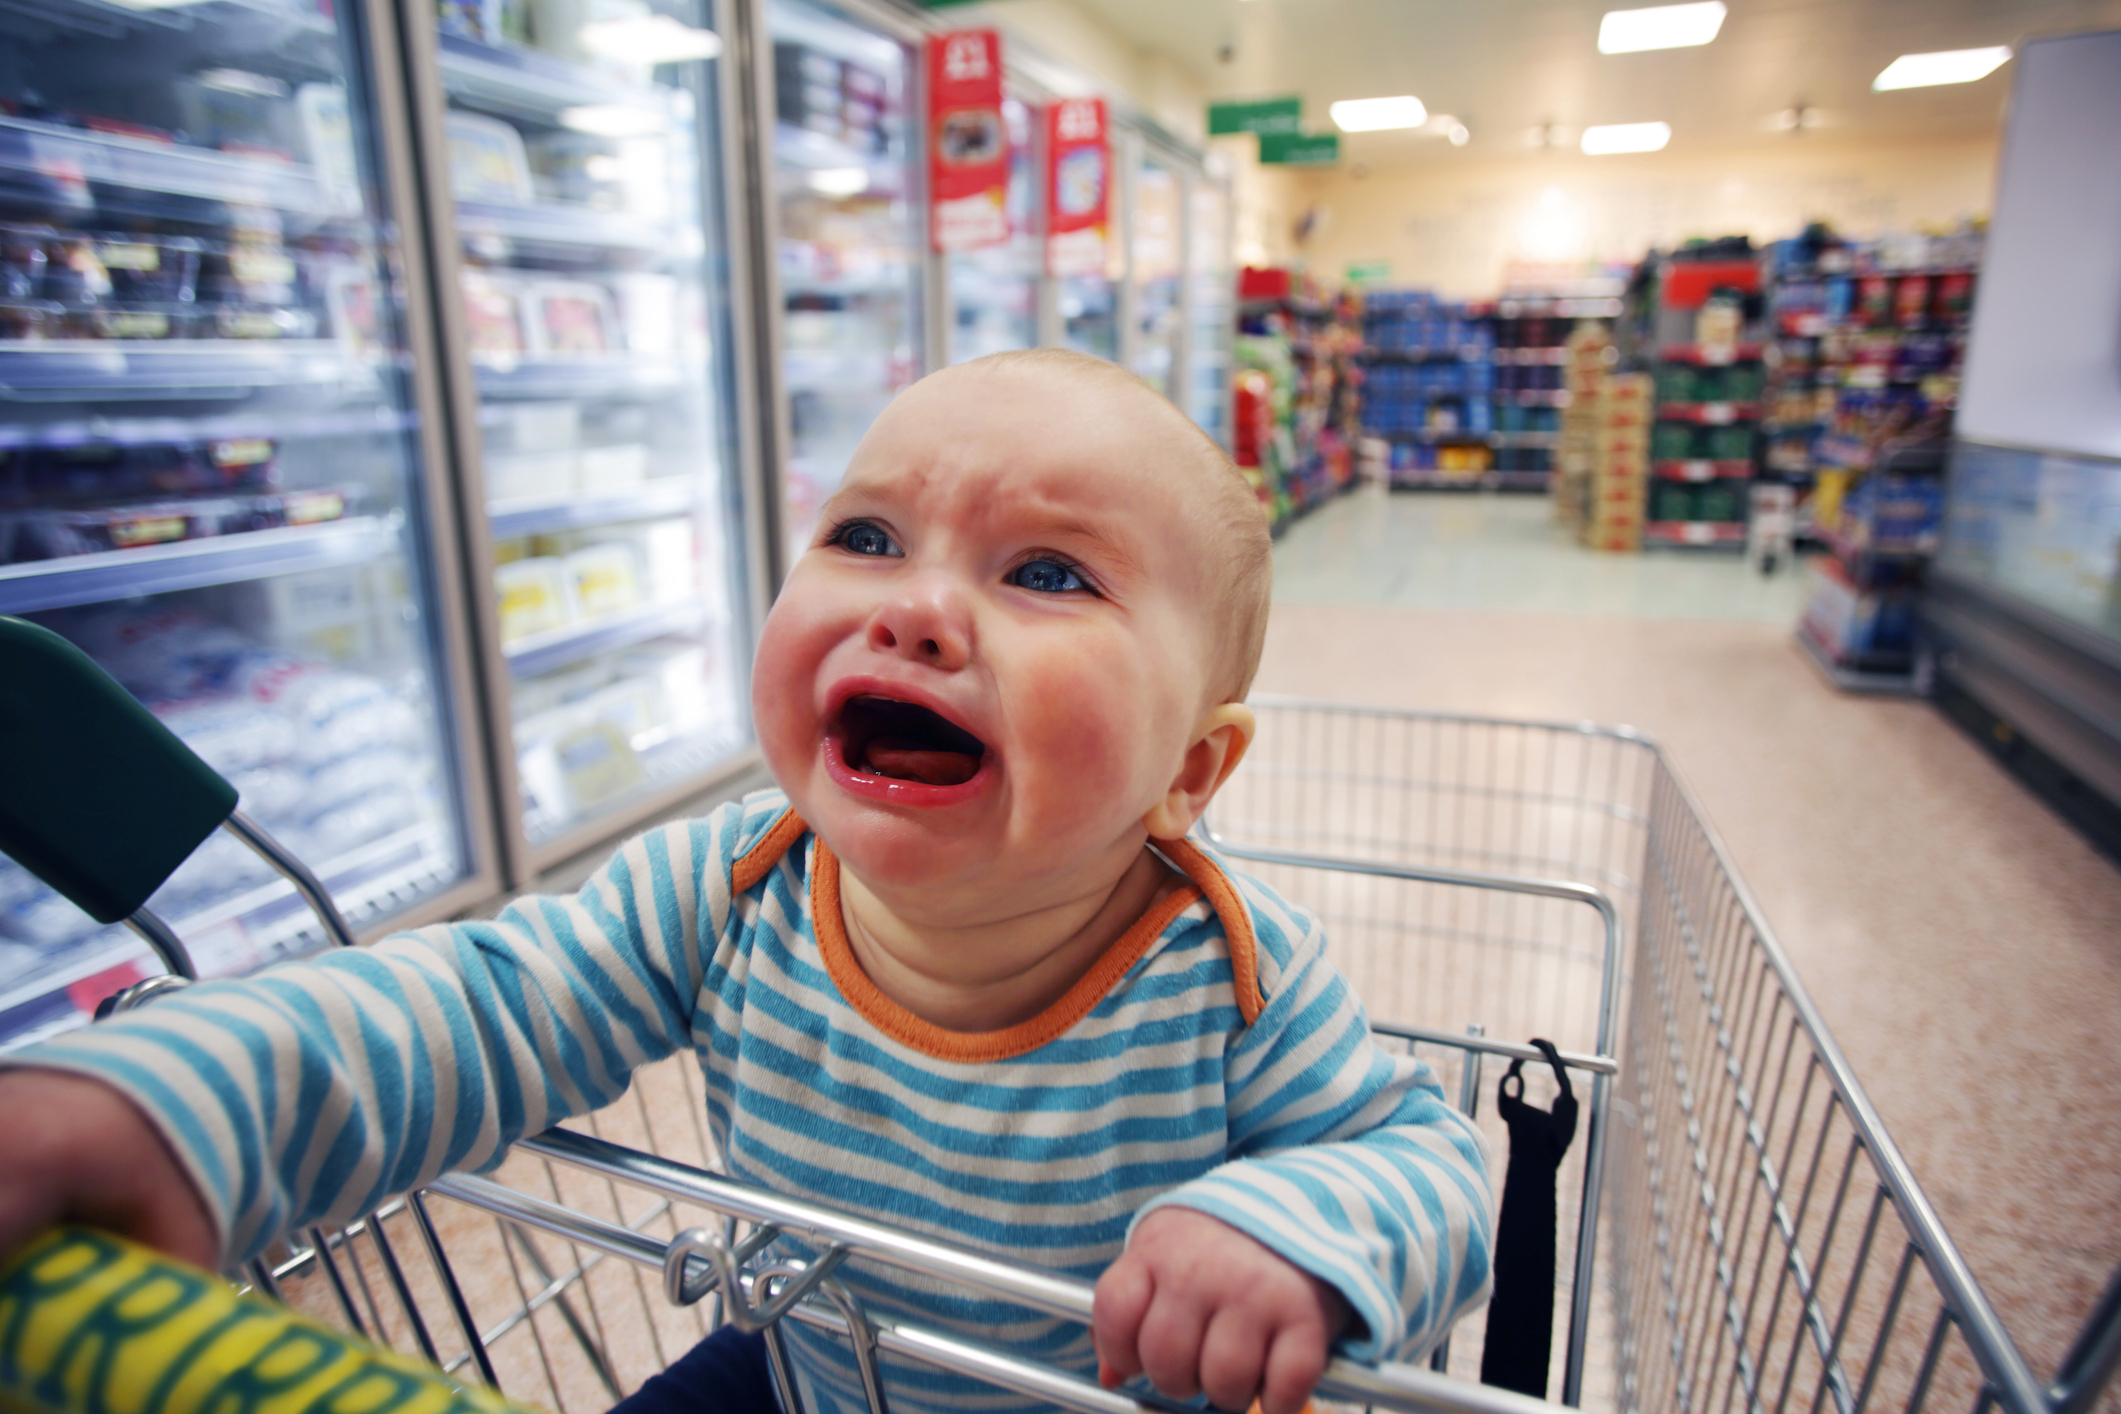 Baby crying in a shopping cart at a grocery store